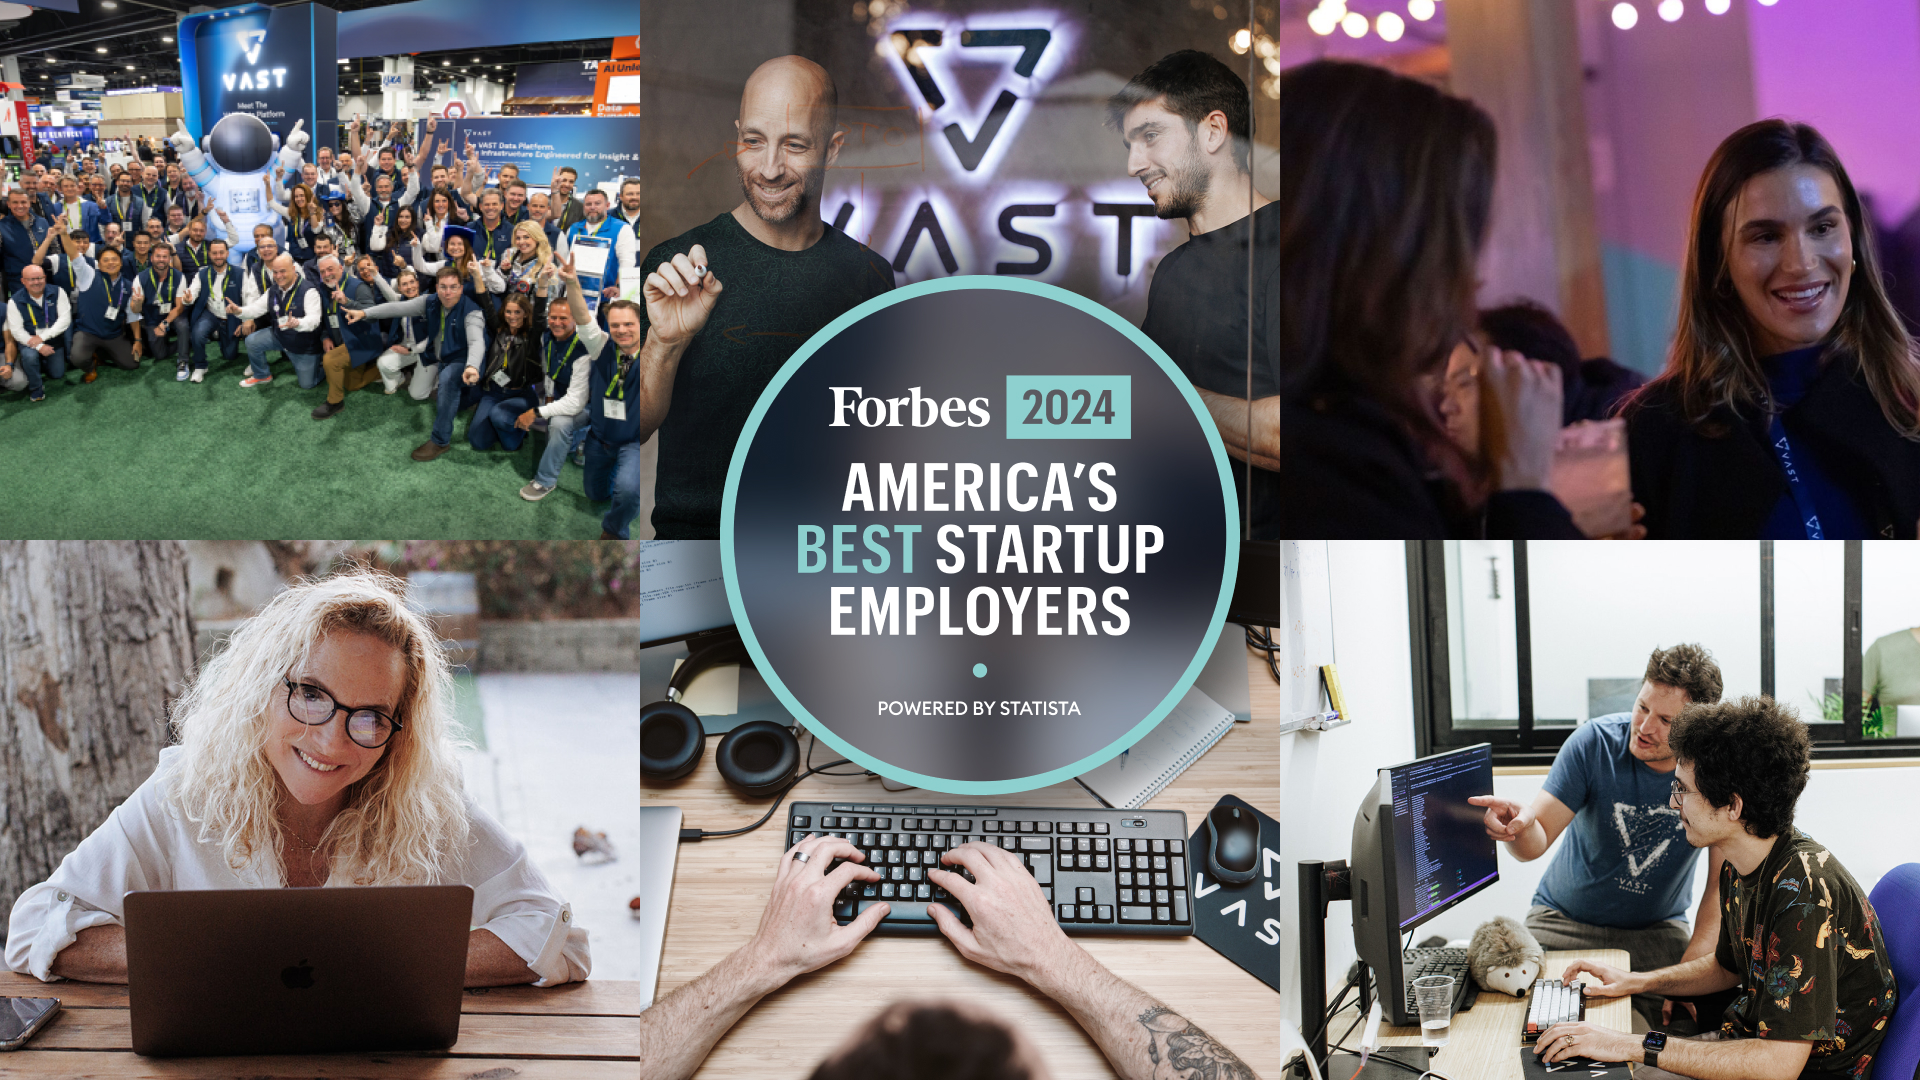 VAST Data Ranks #7 Overall in Forbes’ America’s Best Startup Employers 2024 List